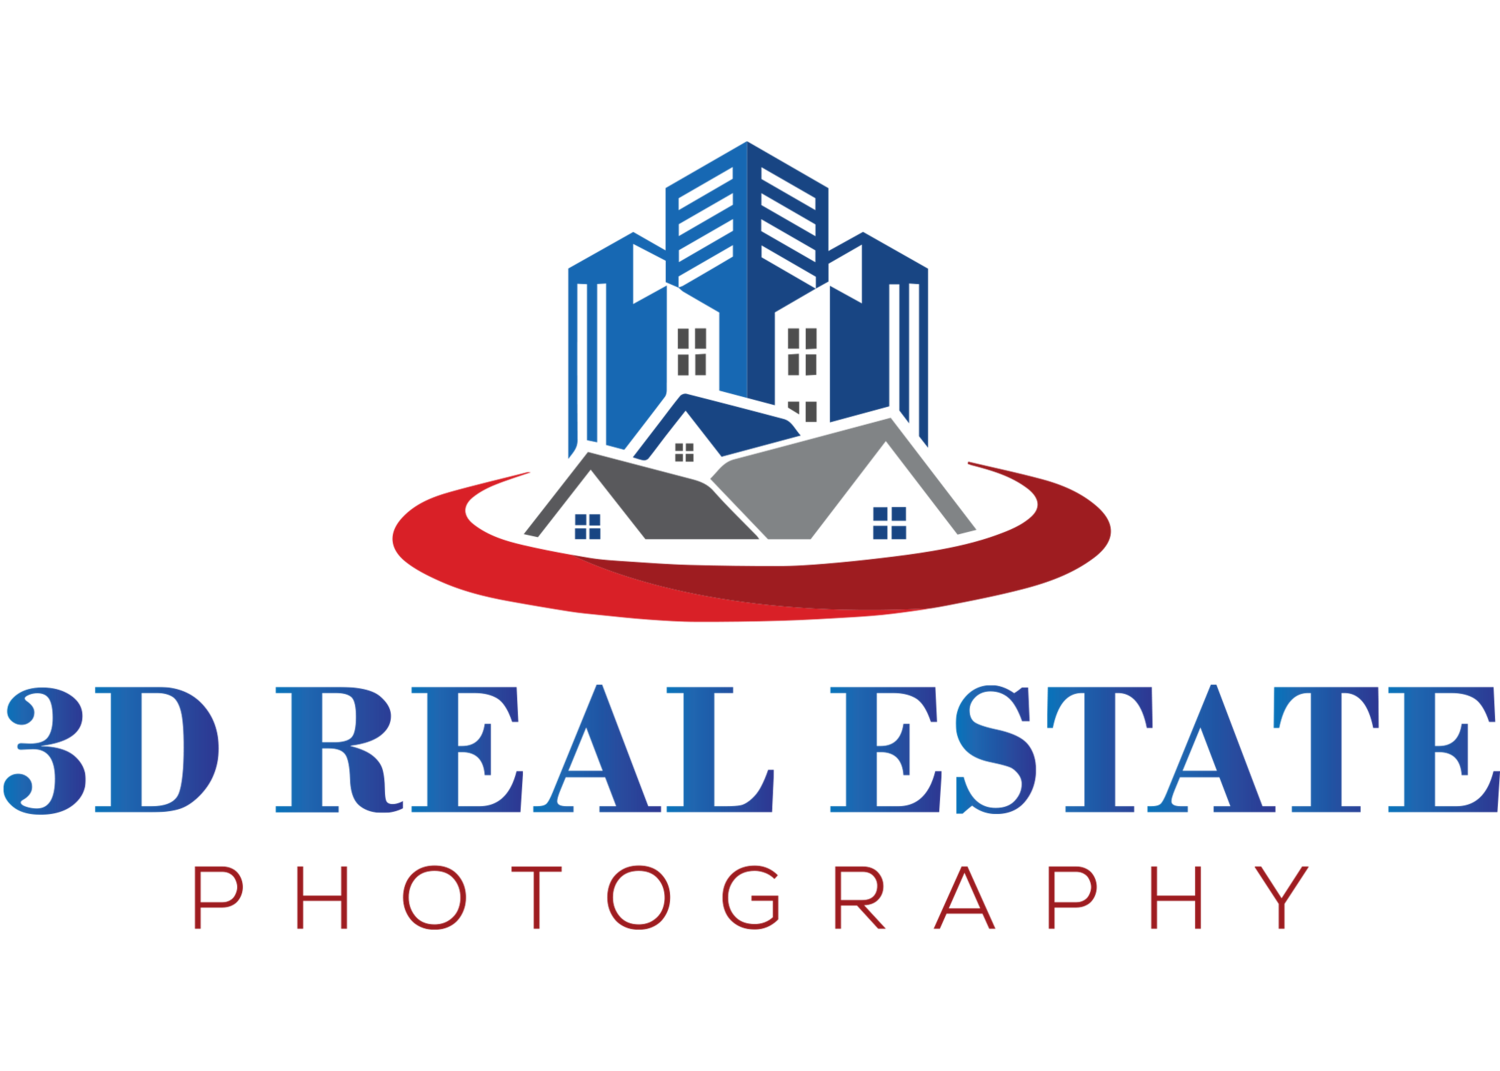 3D Real Estate Photography